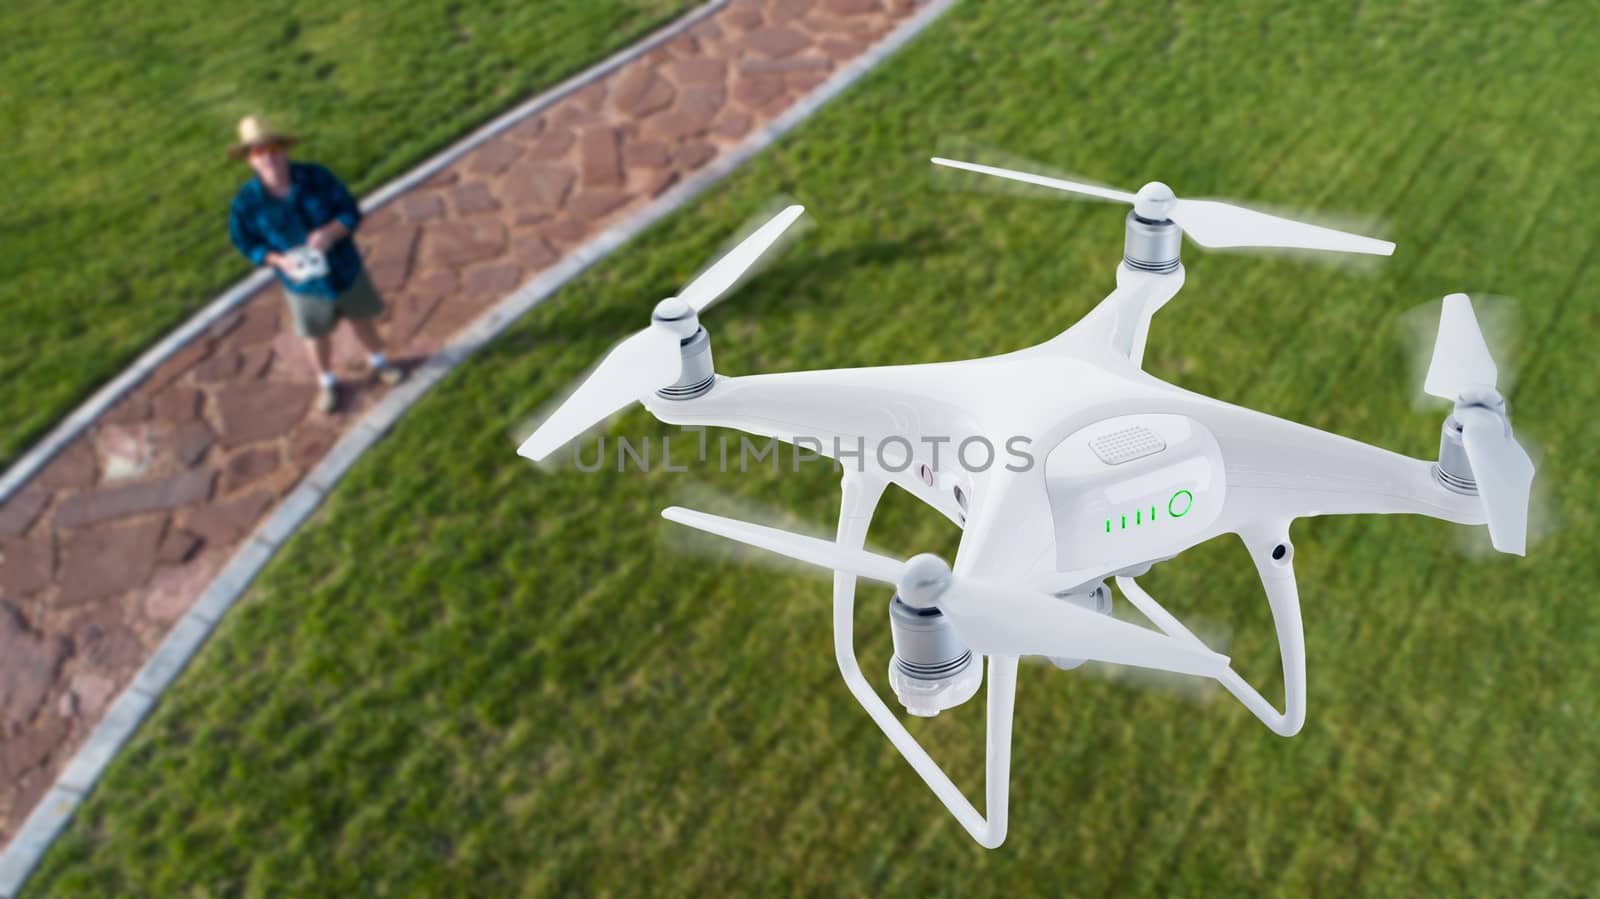 Drone Quadcopter (UAV) In Air Above Pilot With Remote Controller.